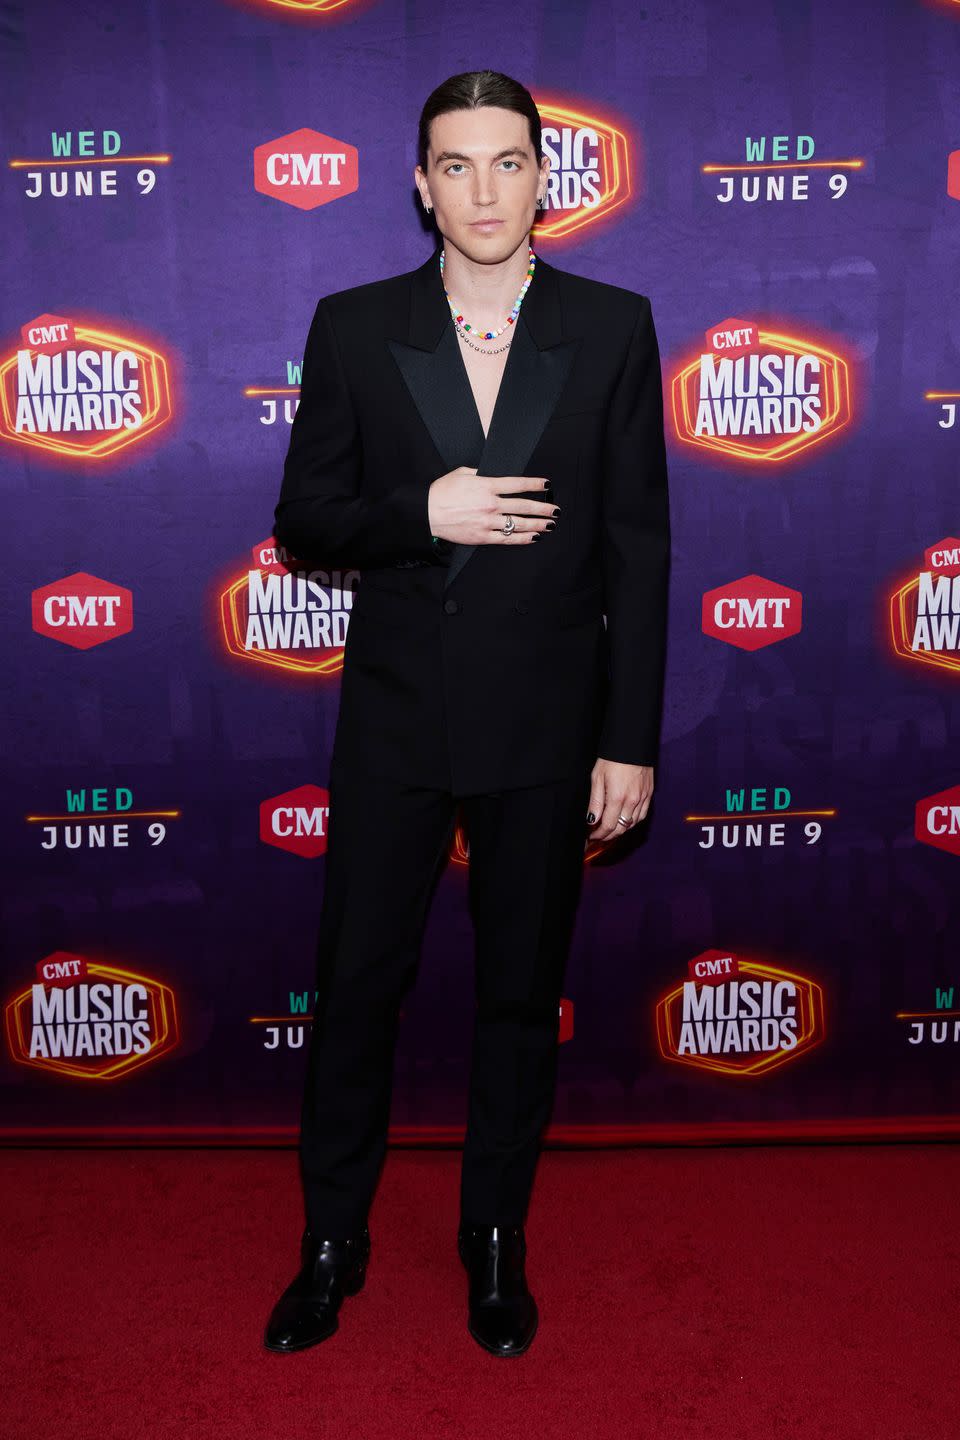 franklin, tennessee in this image released on june 9th 2021, paul klein of lany poses for the 2021 cmt music awards at the park at harlinsdale farm in franklin, tennessee broadcast on june 9, 2021 photo by john shearer2021 cmt awardsgetty images for cmt